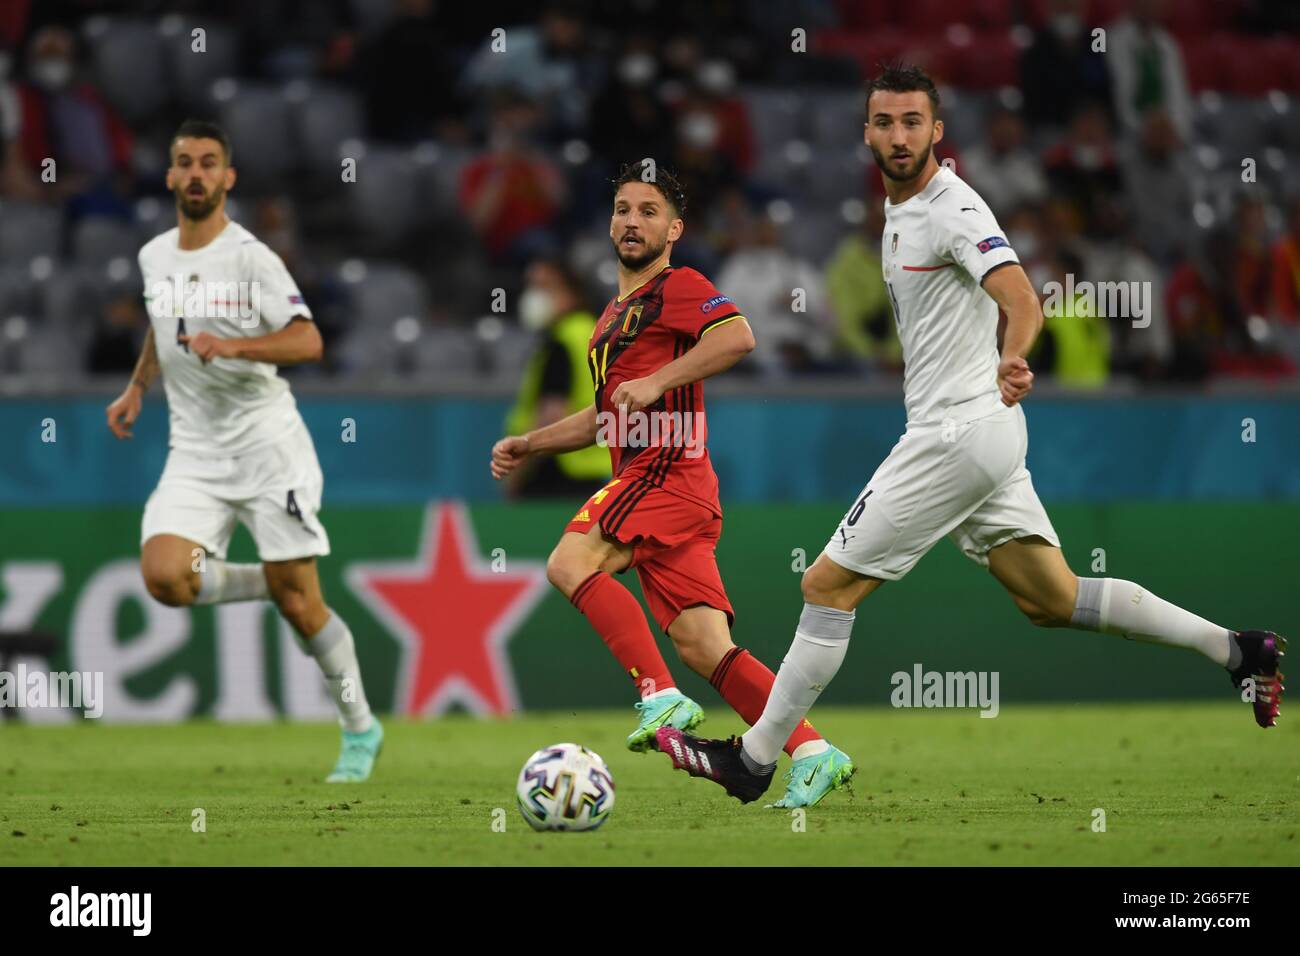 Munchen, Germany. 2nd July 2021. Dries Mertens (Belgium)Bryan Cristante (Italy) during the Uefa 'European Championship 2020 Quarter-finals match between Belgium 1-2 Italy at Allianz Arena on July 02, 2021 in Munchen, Germany. Credit: Maurizio Borsari/AFLO/Alamy Live News Stock Photo